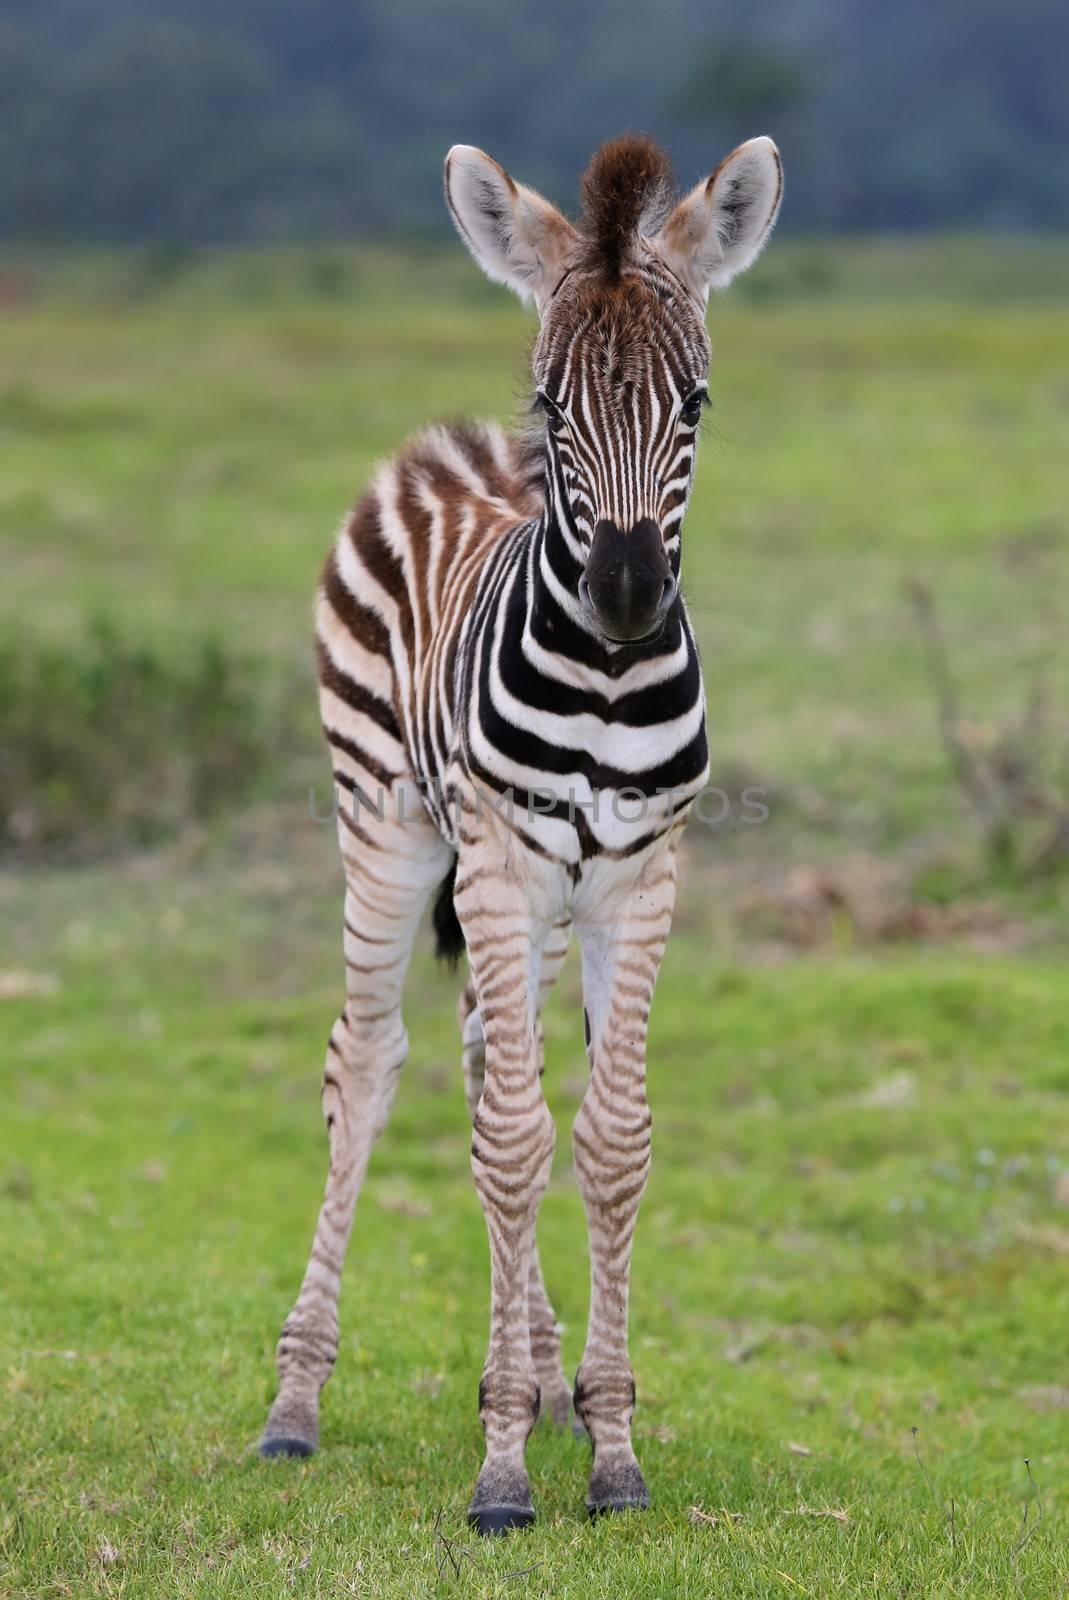 Cute small baby Plains zebra from Africa